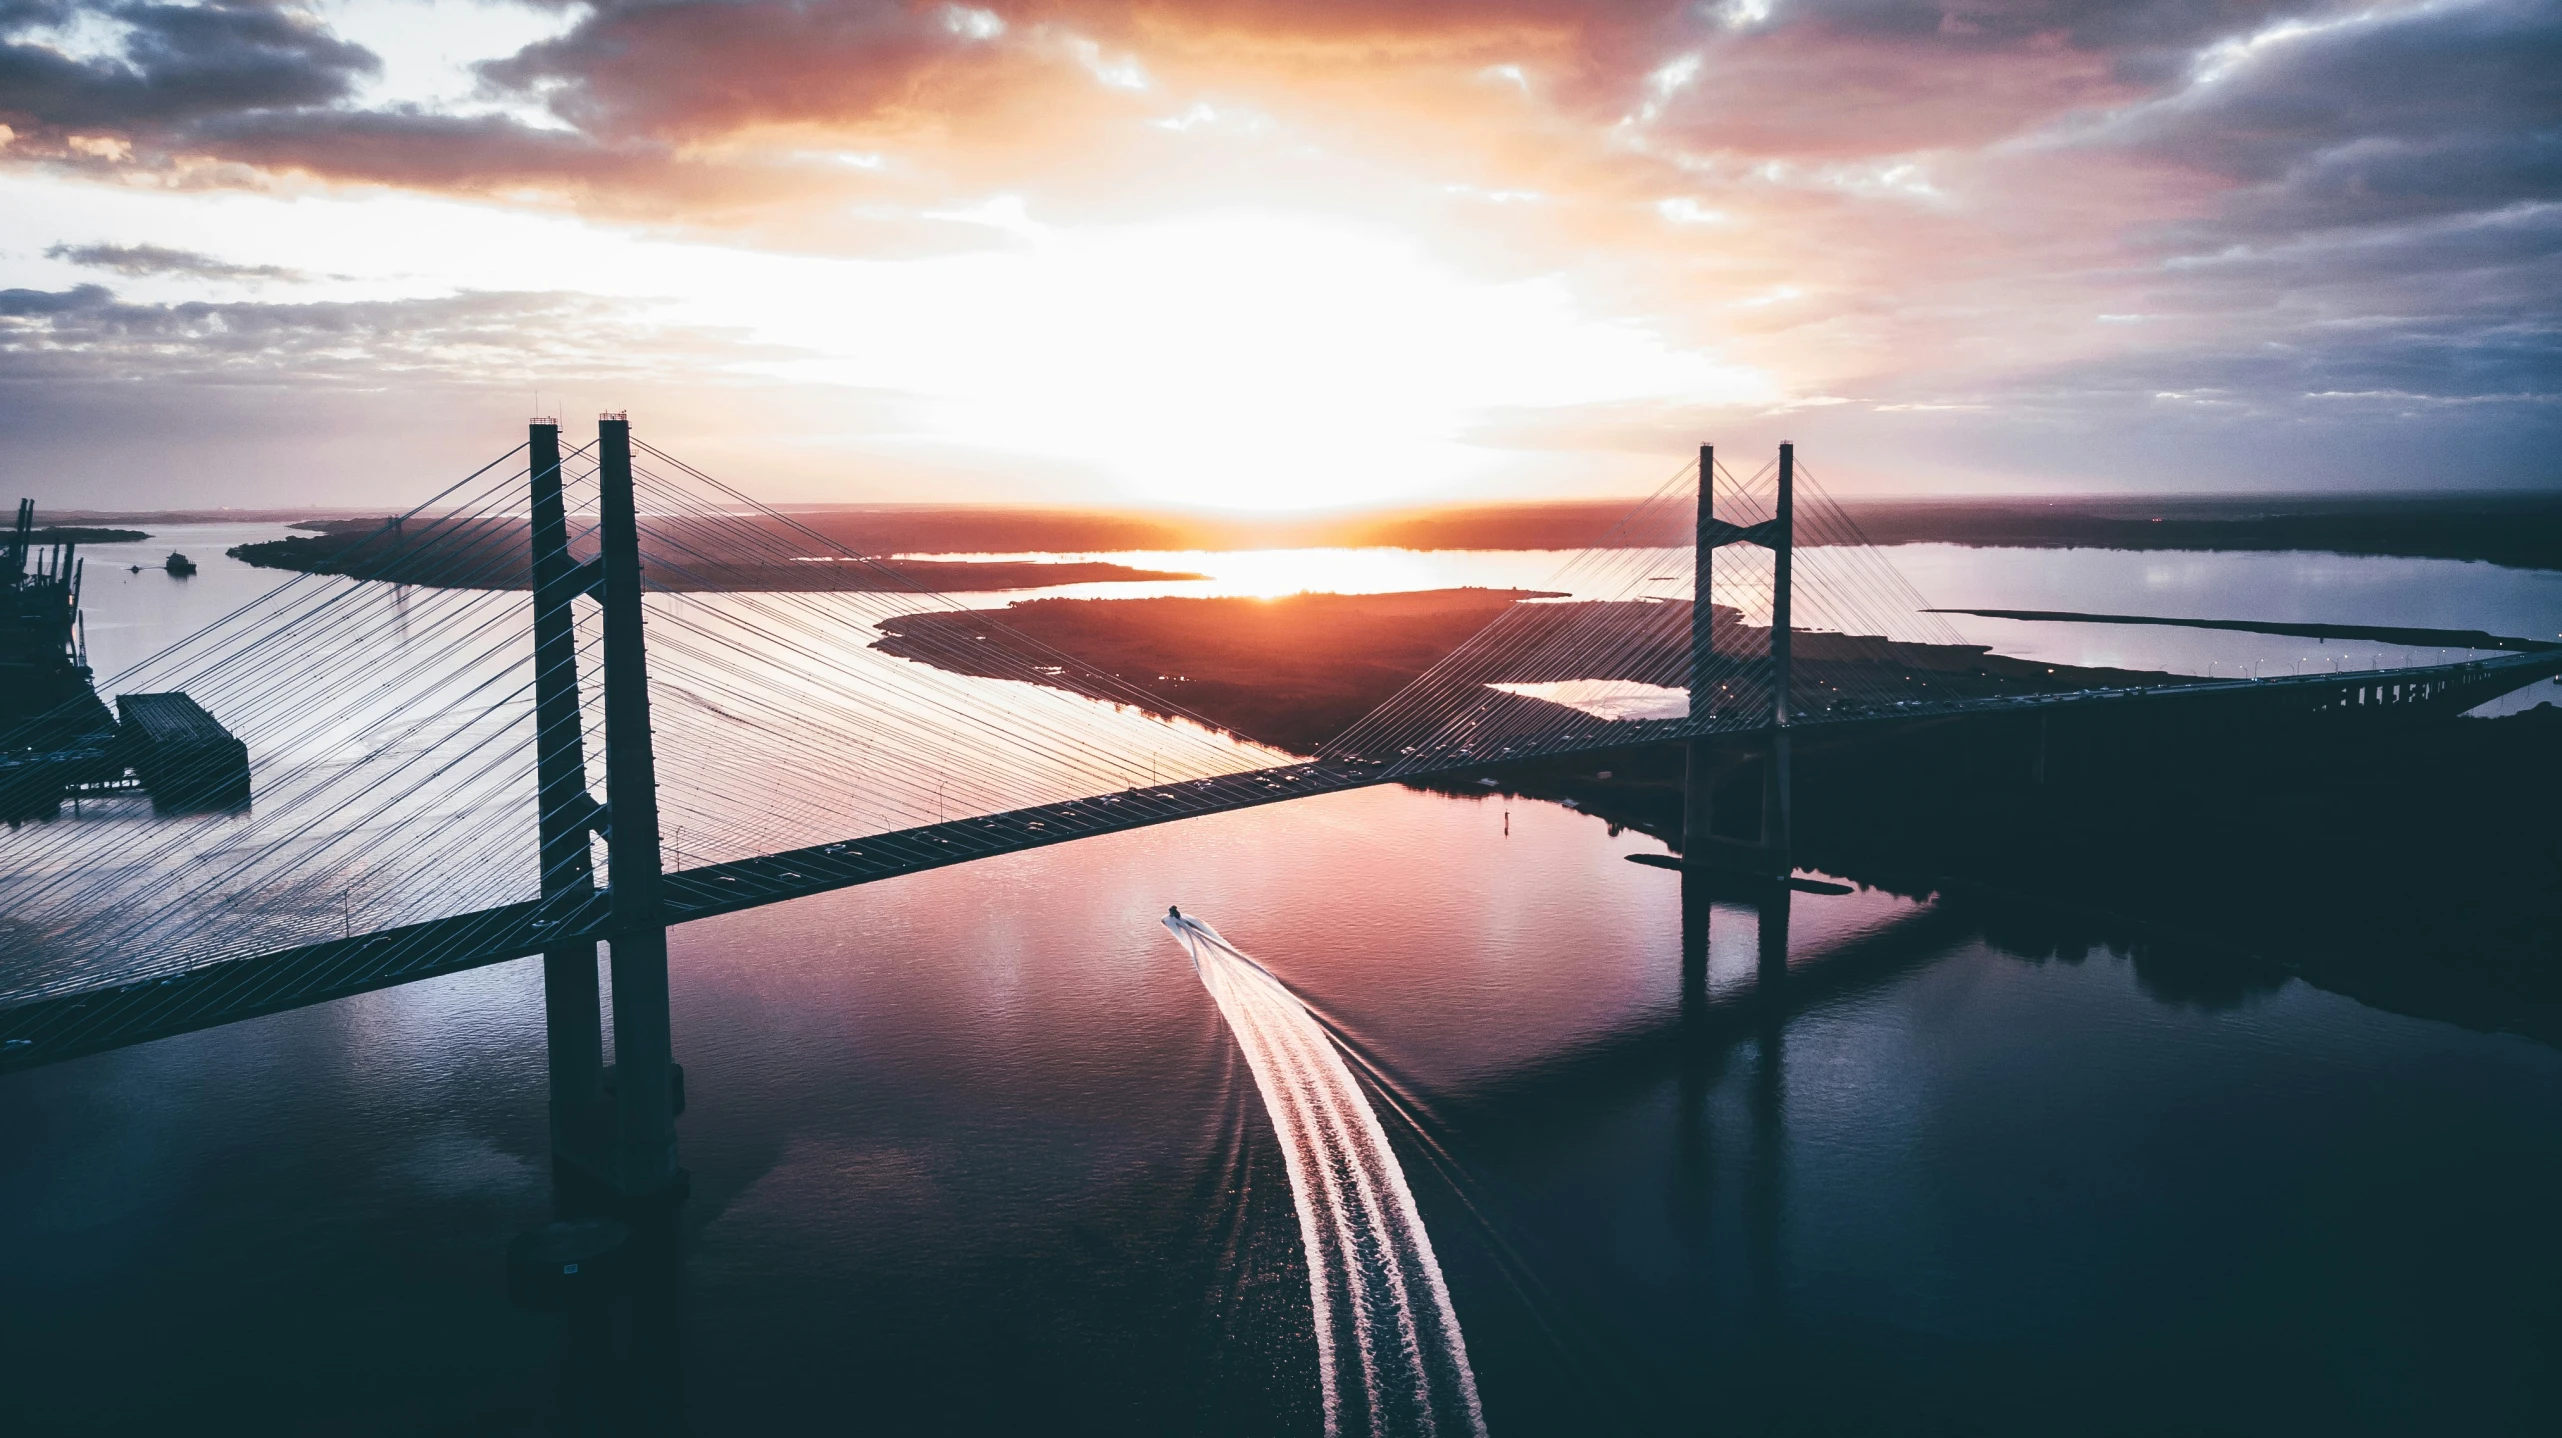 a sunset over a bridge with a body of water